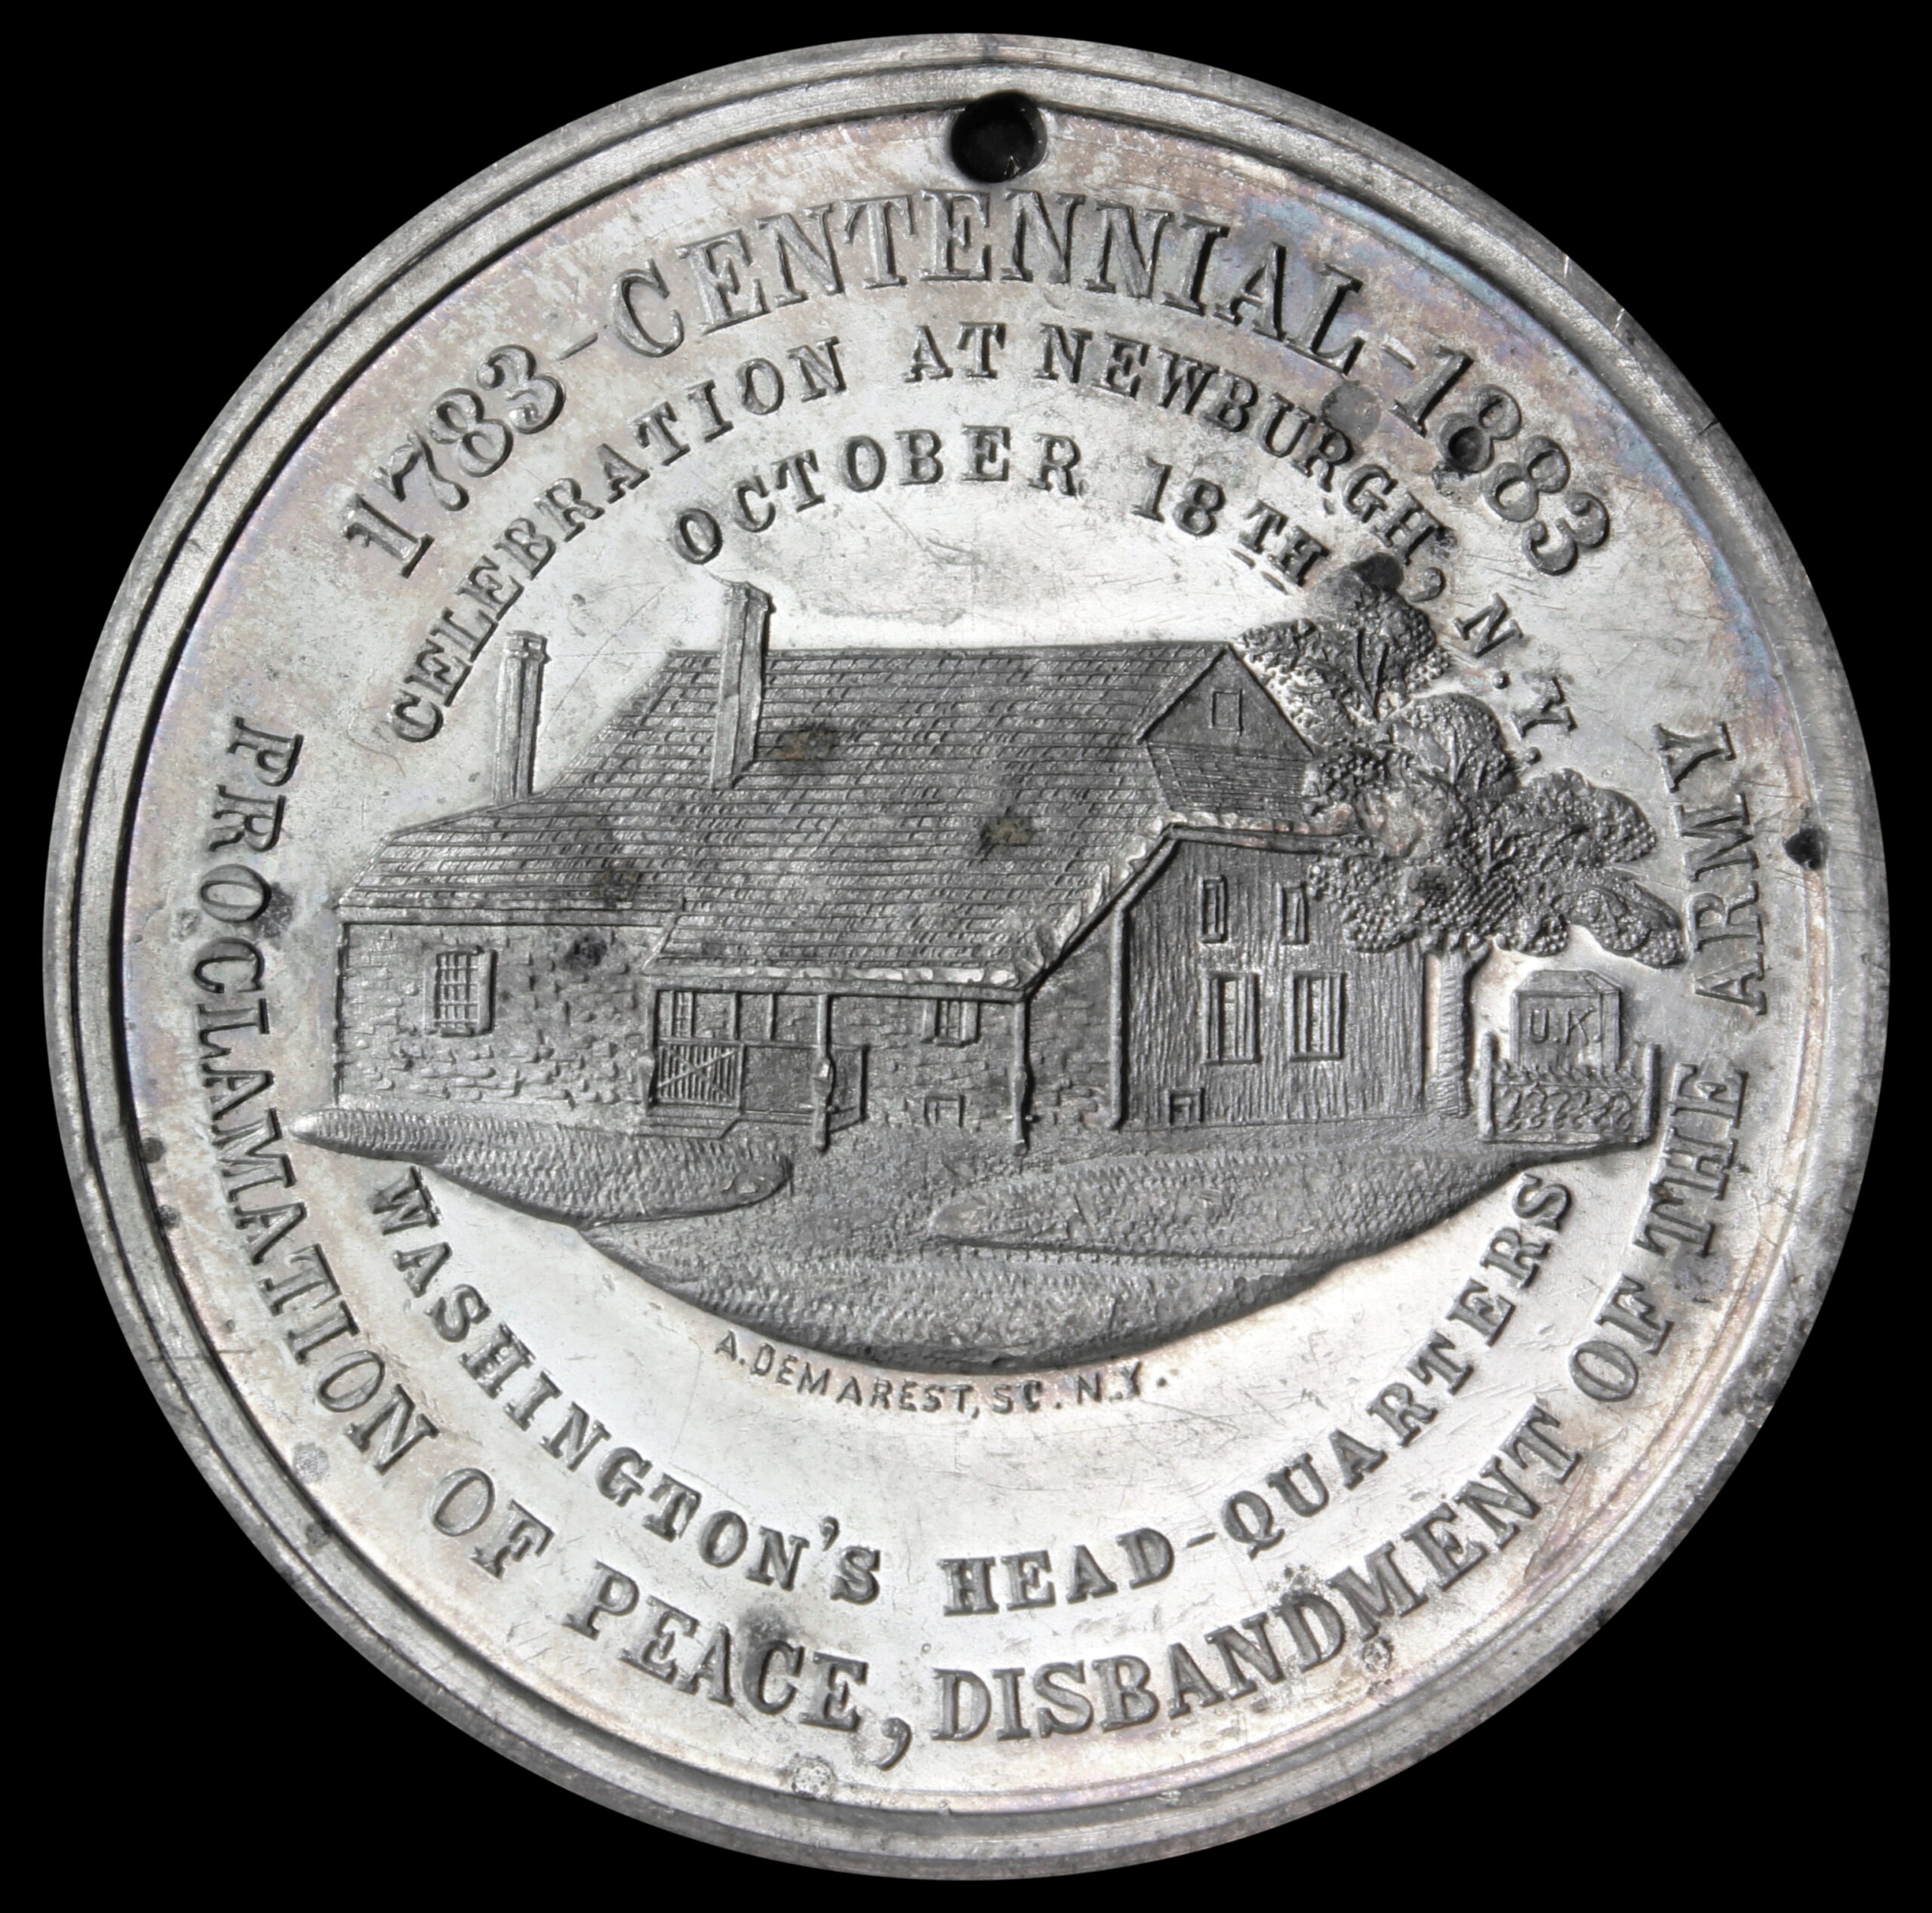 HK-135 1883 Washington’s Headquarters at Newburgh and Coat of Arms SCD